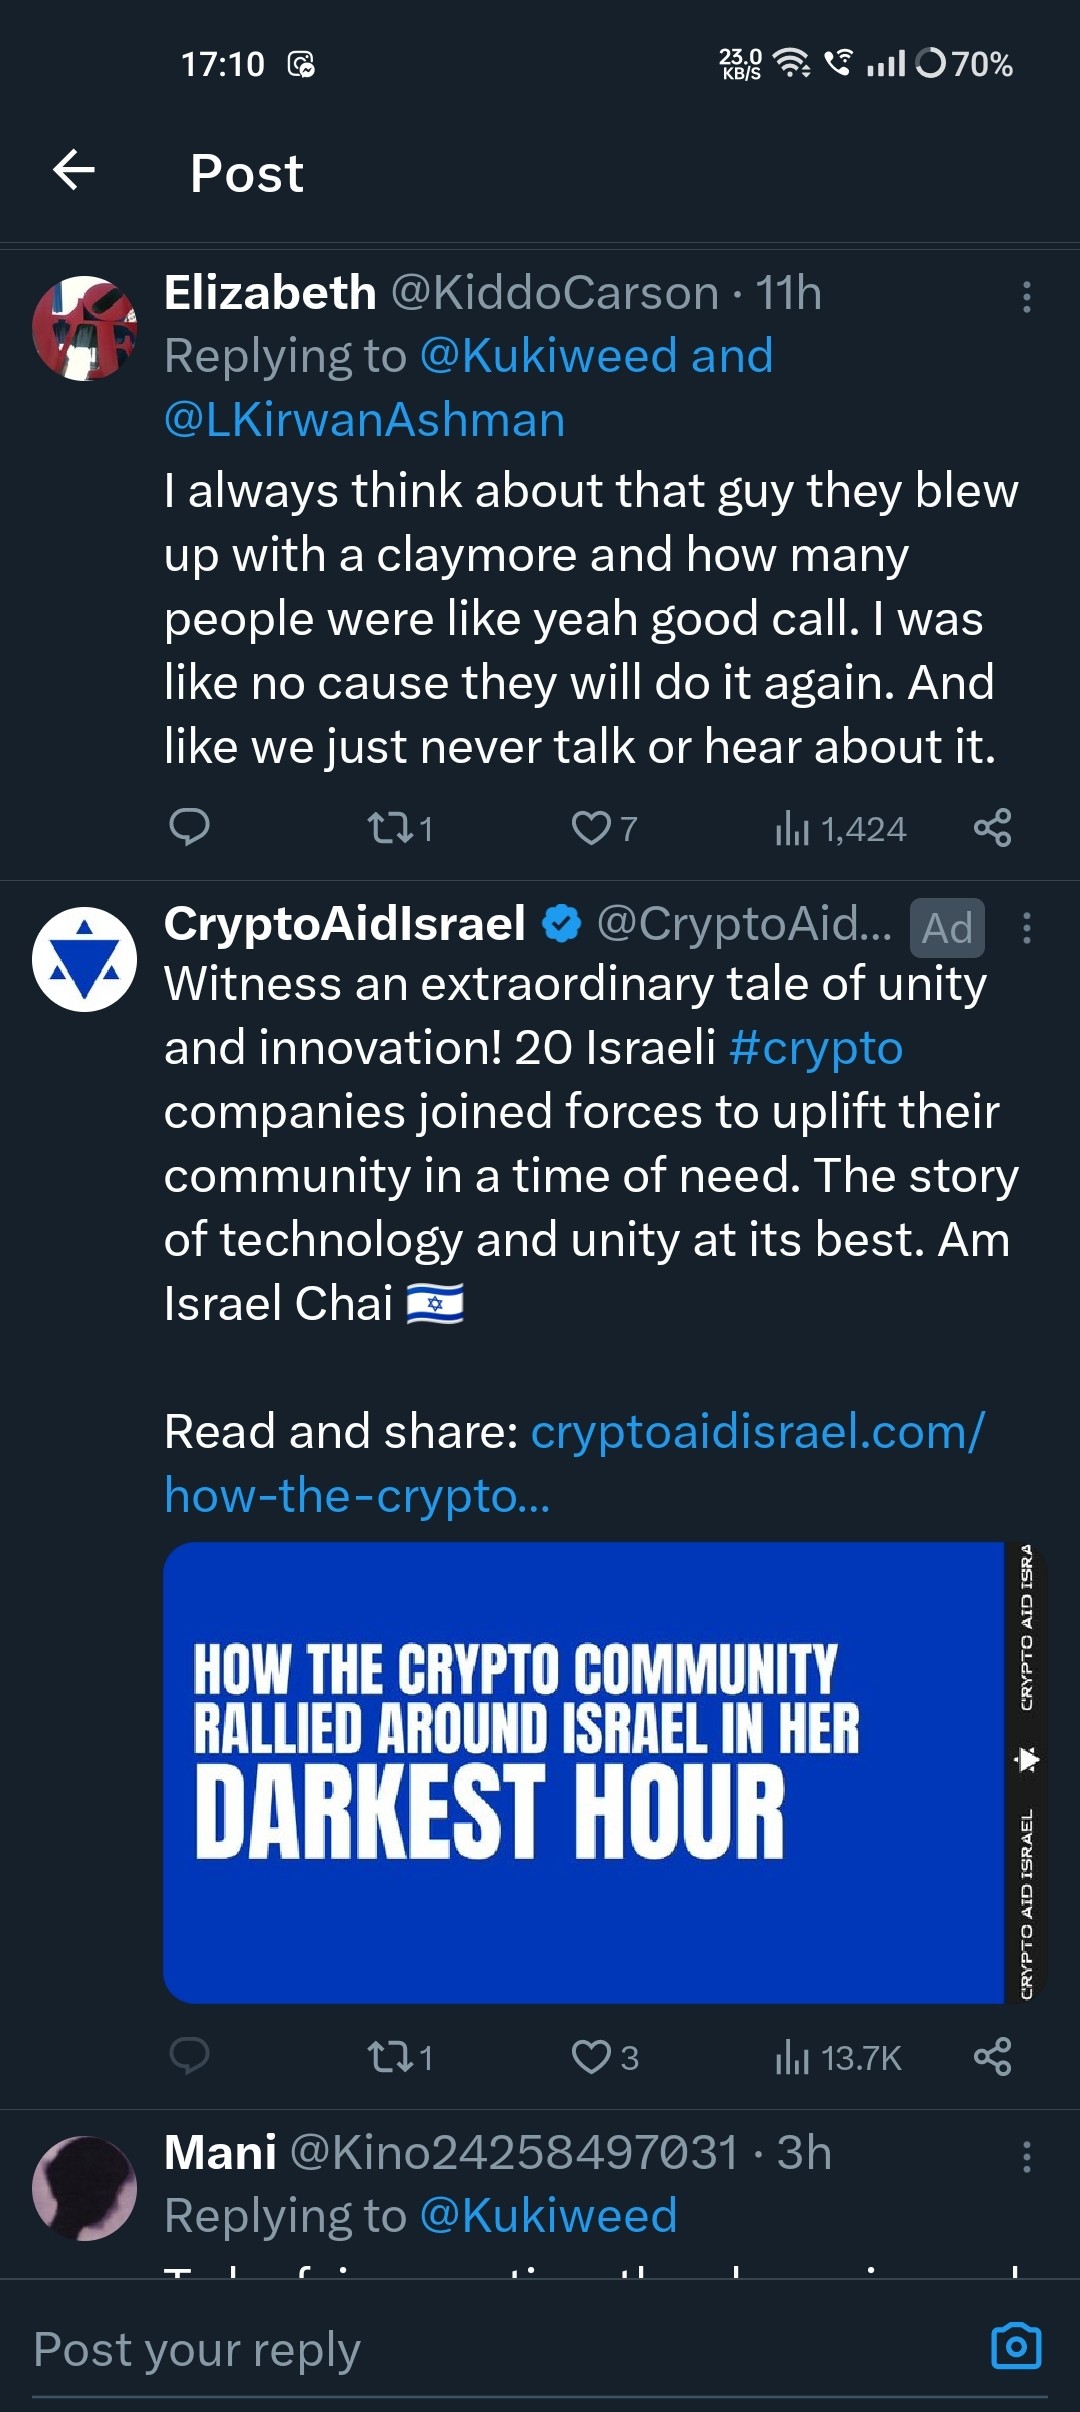 in the middle of some tweet replies, an ad by CryptoAidIsrael saying 